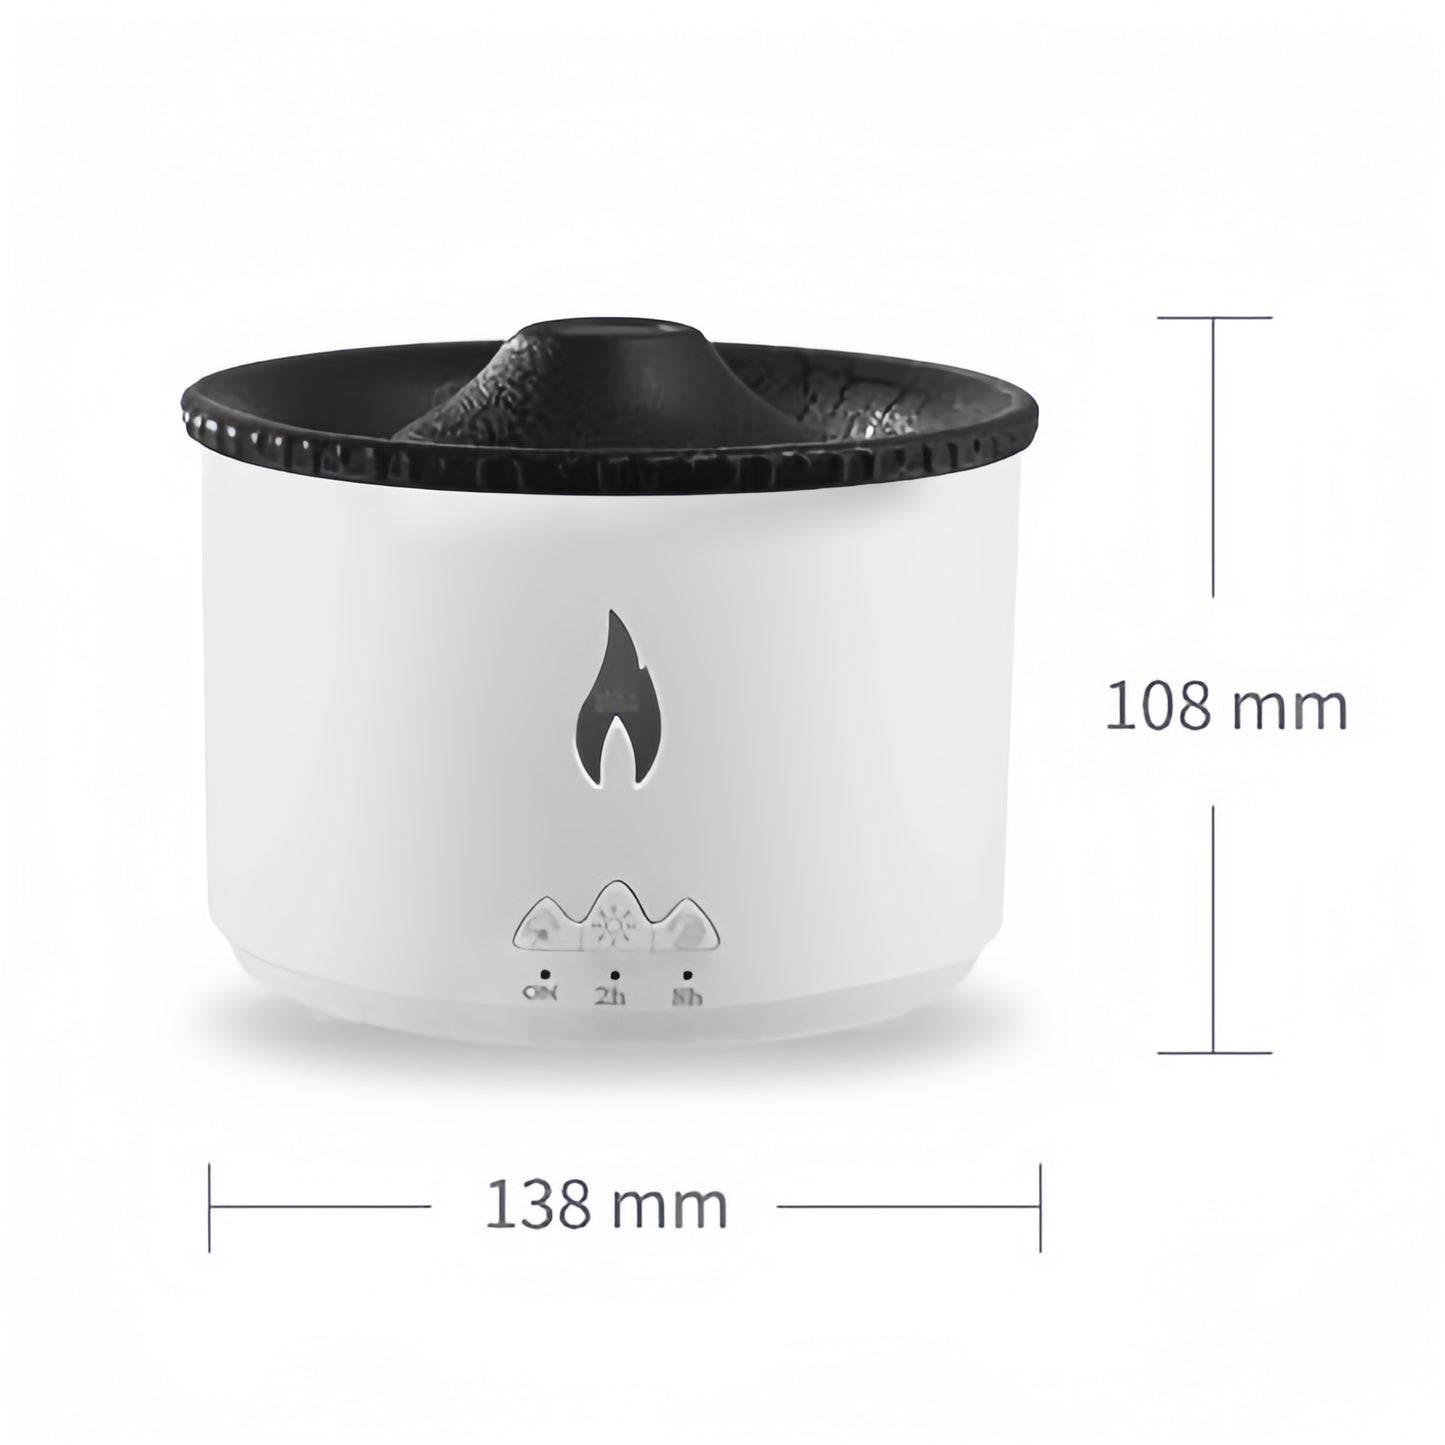 Volcano Humidifier with Dual-Color Ambiance and Aromatherapy - Your Gateway to Tranquility